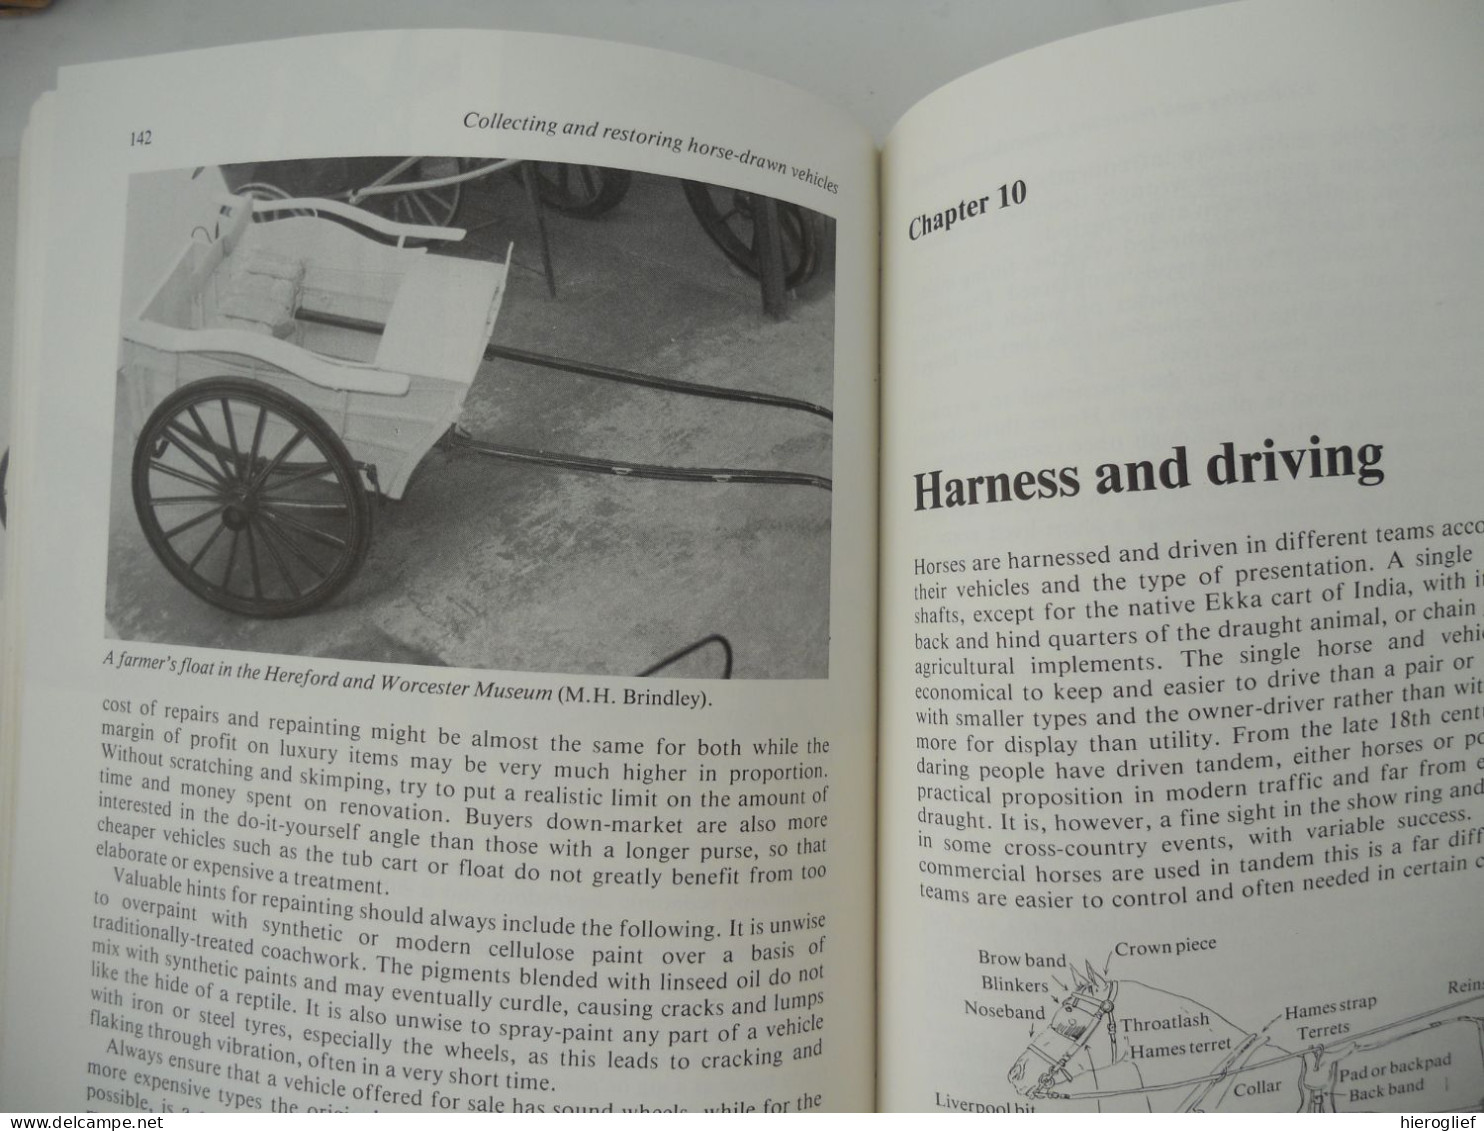 HORSE-DRAWN VEHICLES Collecting & Restoring by Donald J. Smith 1981 paarden koetsen trektuigen commercial agricultural